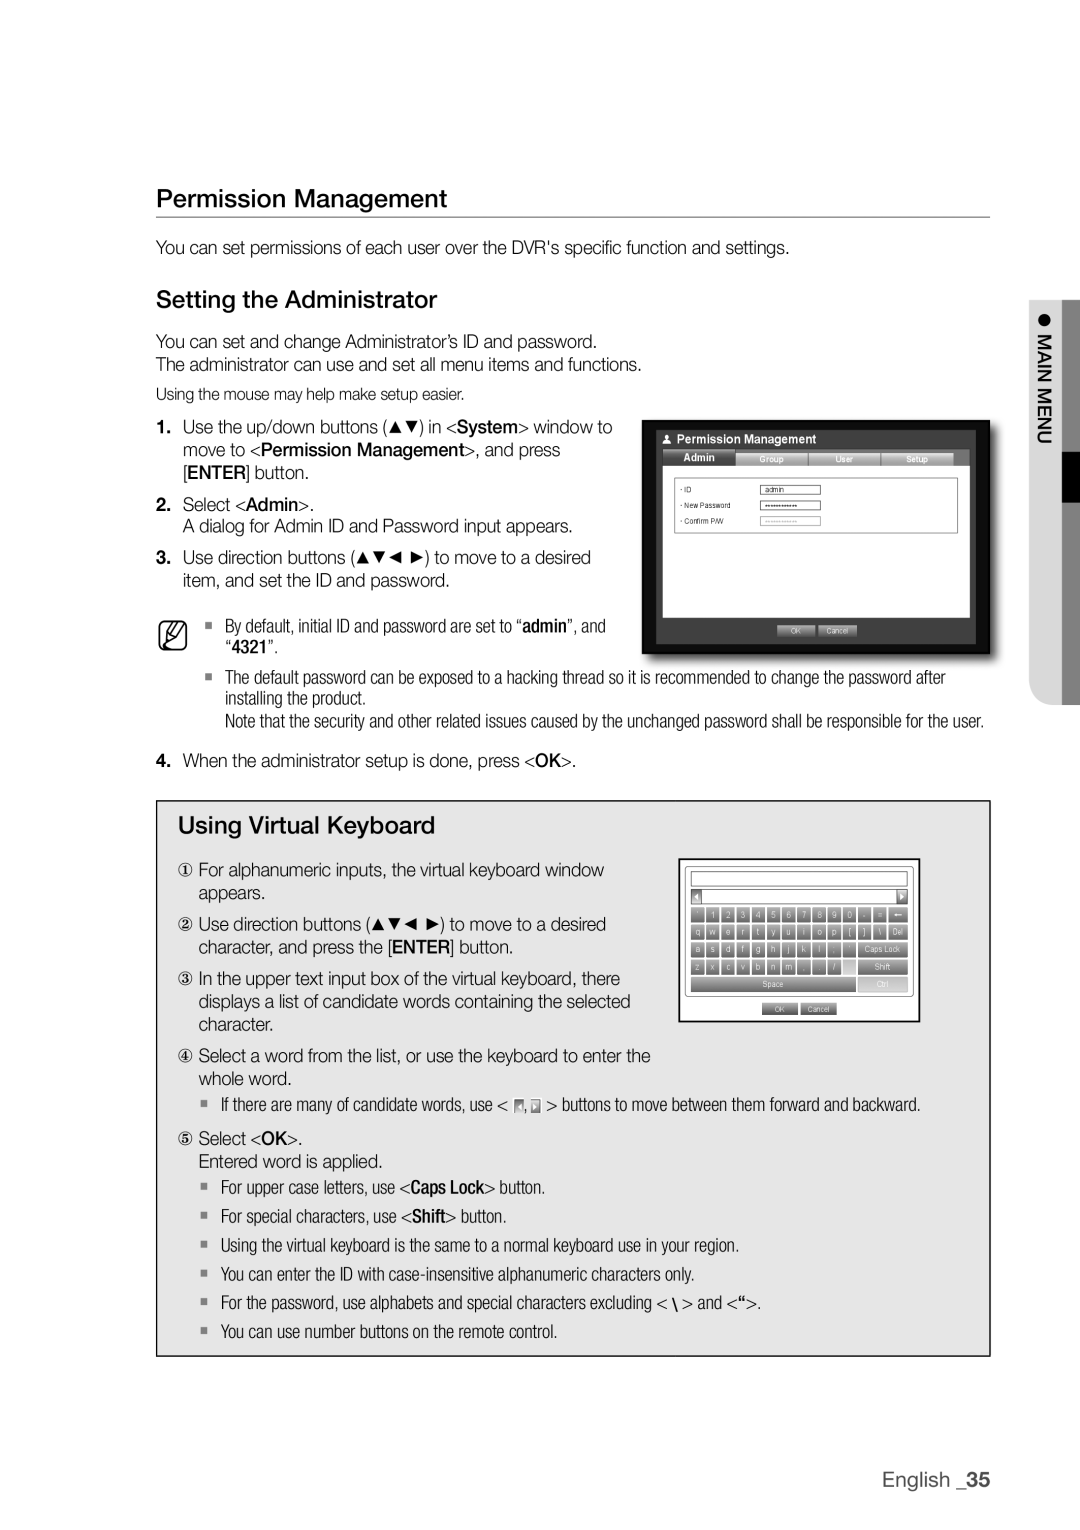 Samsung SDR3100 Permission management, Setting the administrator, English, using Virtual Keyboard, appears, character 